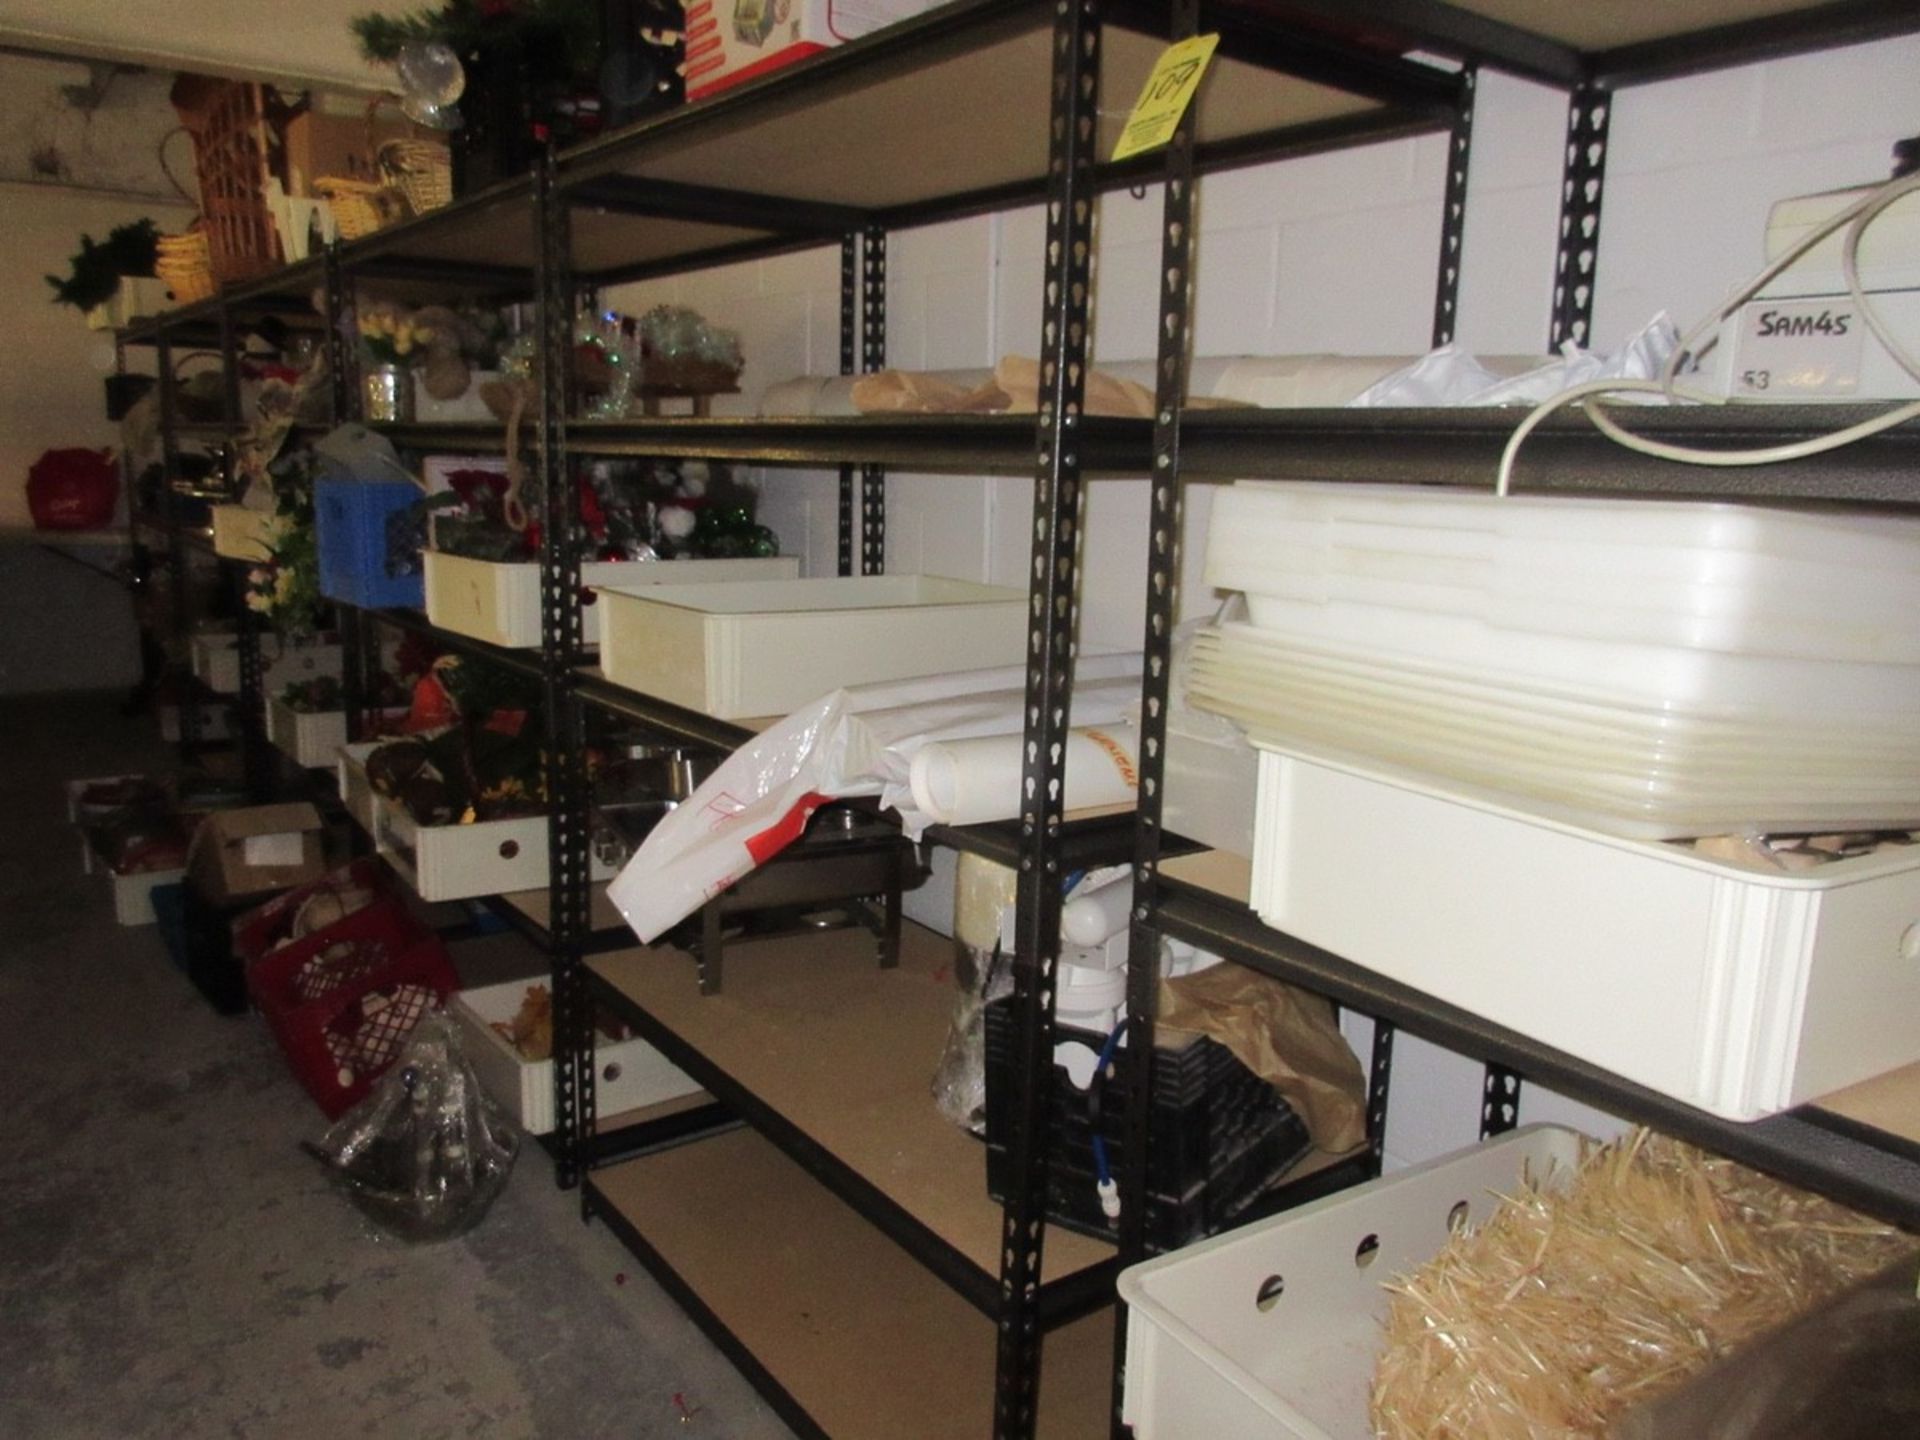 LOT (6) Sections of L.D. Shelving w/ Contents Consisting of (2) Sam4S Cash Registers, Cake Plates, D